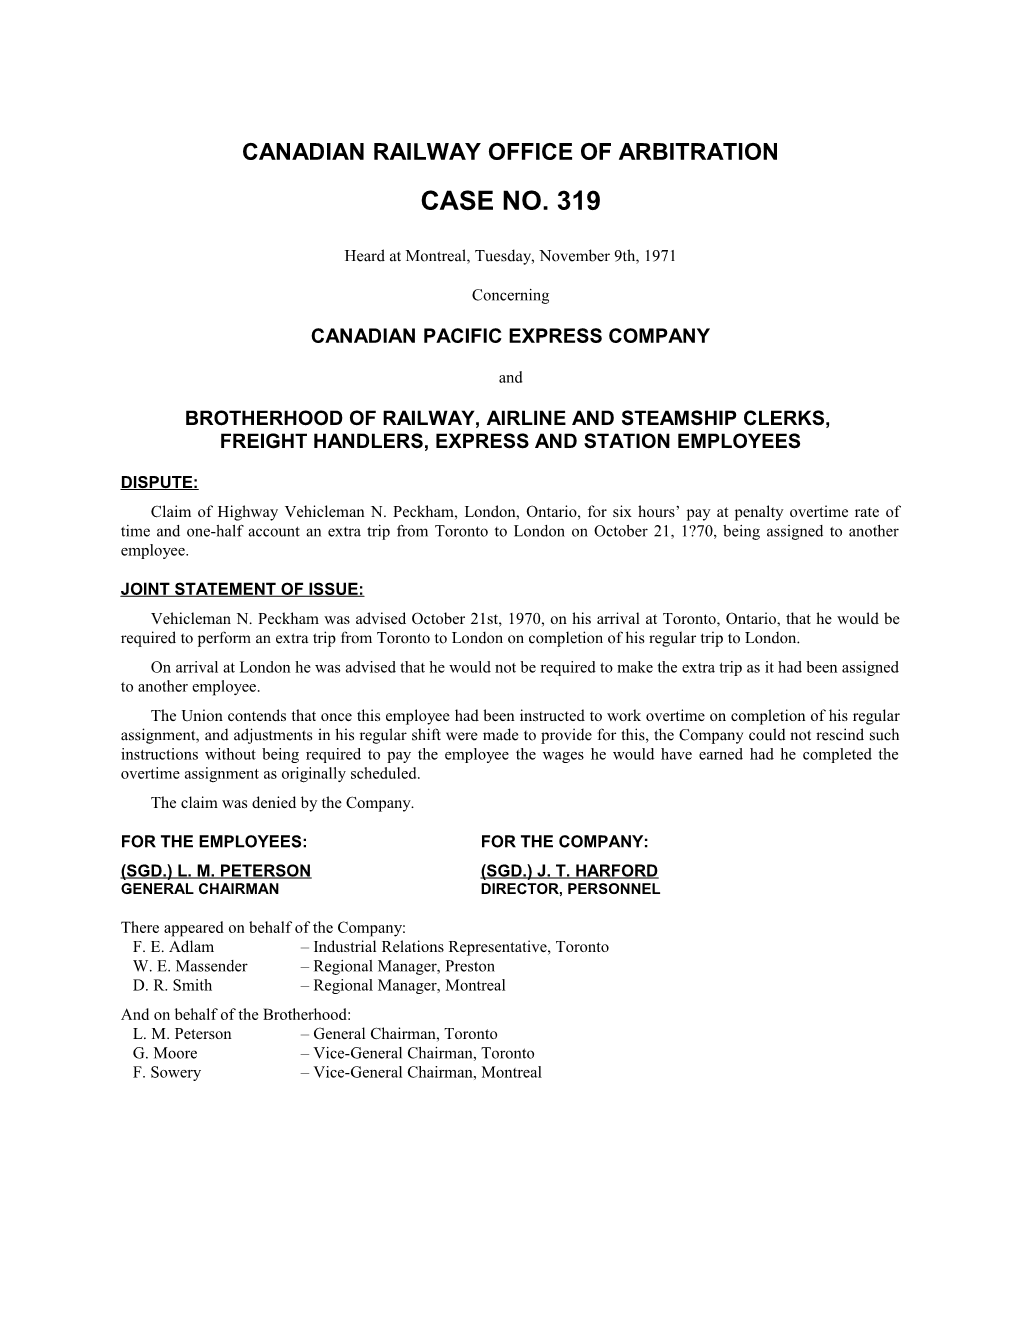 Canadian Railway Office of Arbitration s1